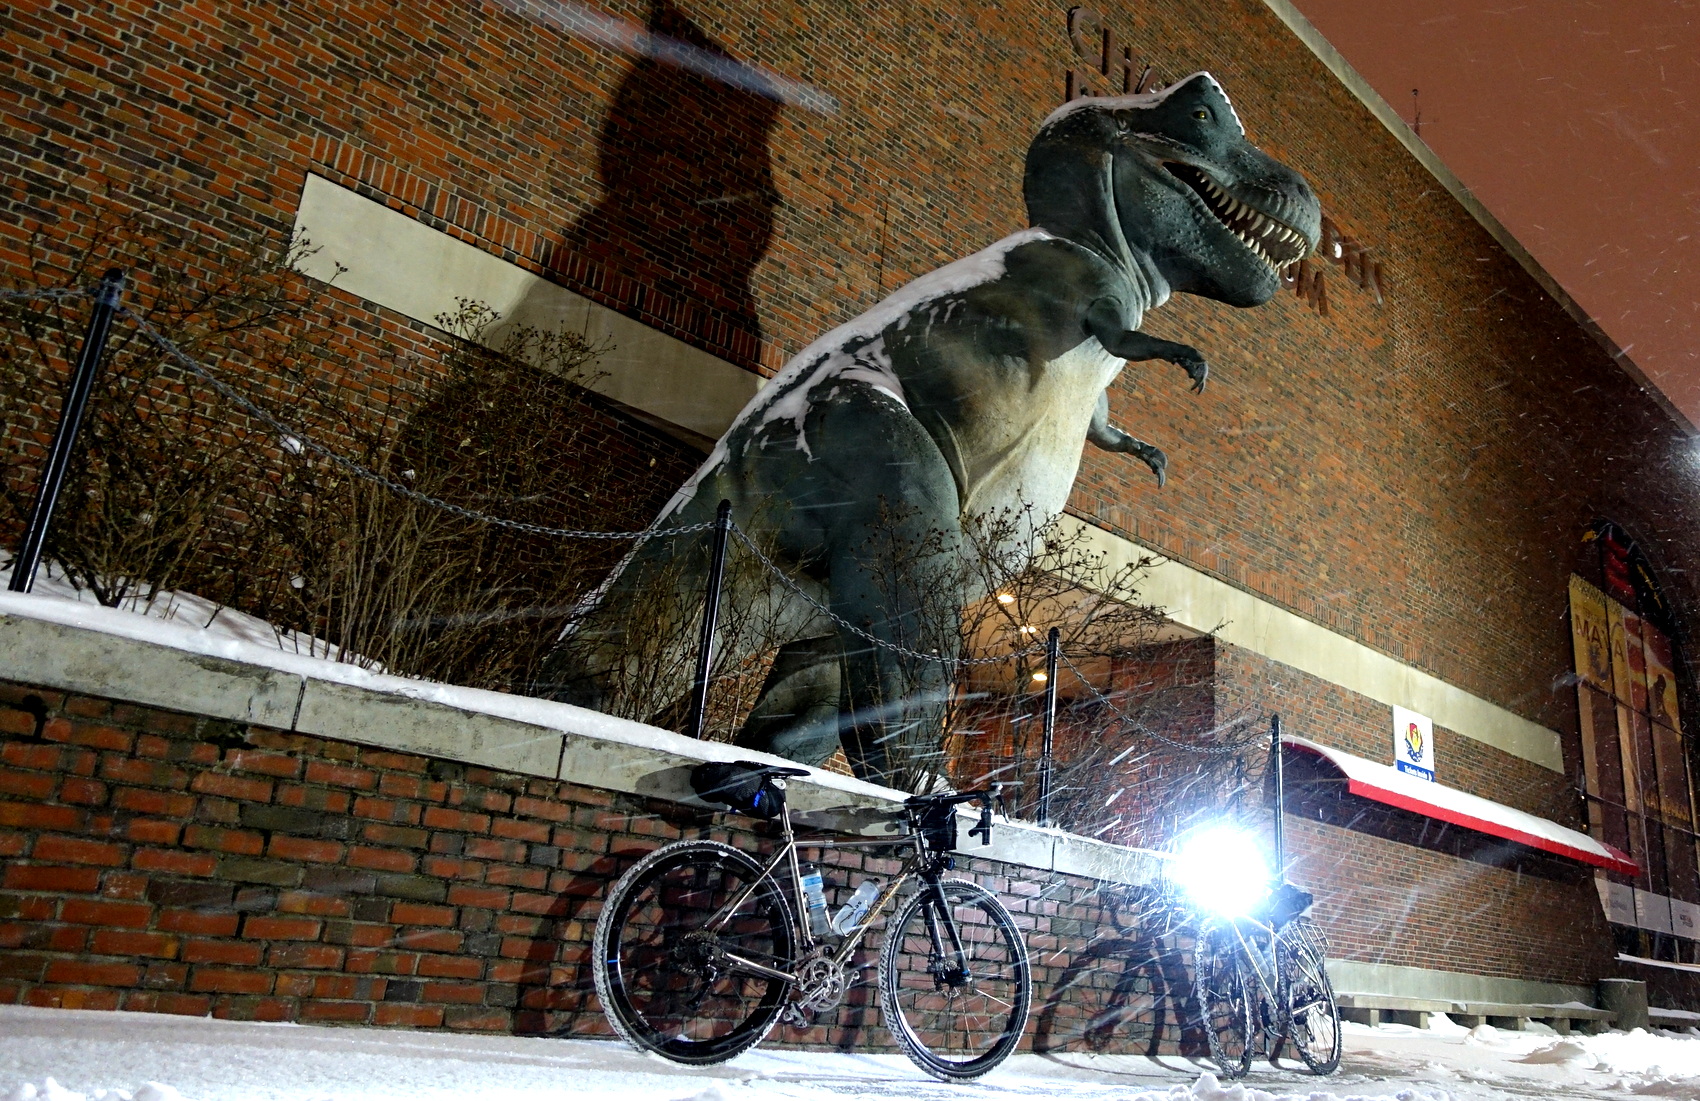 T-Rex in the snowstorm